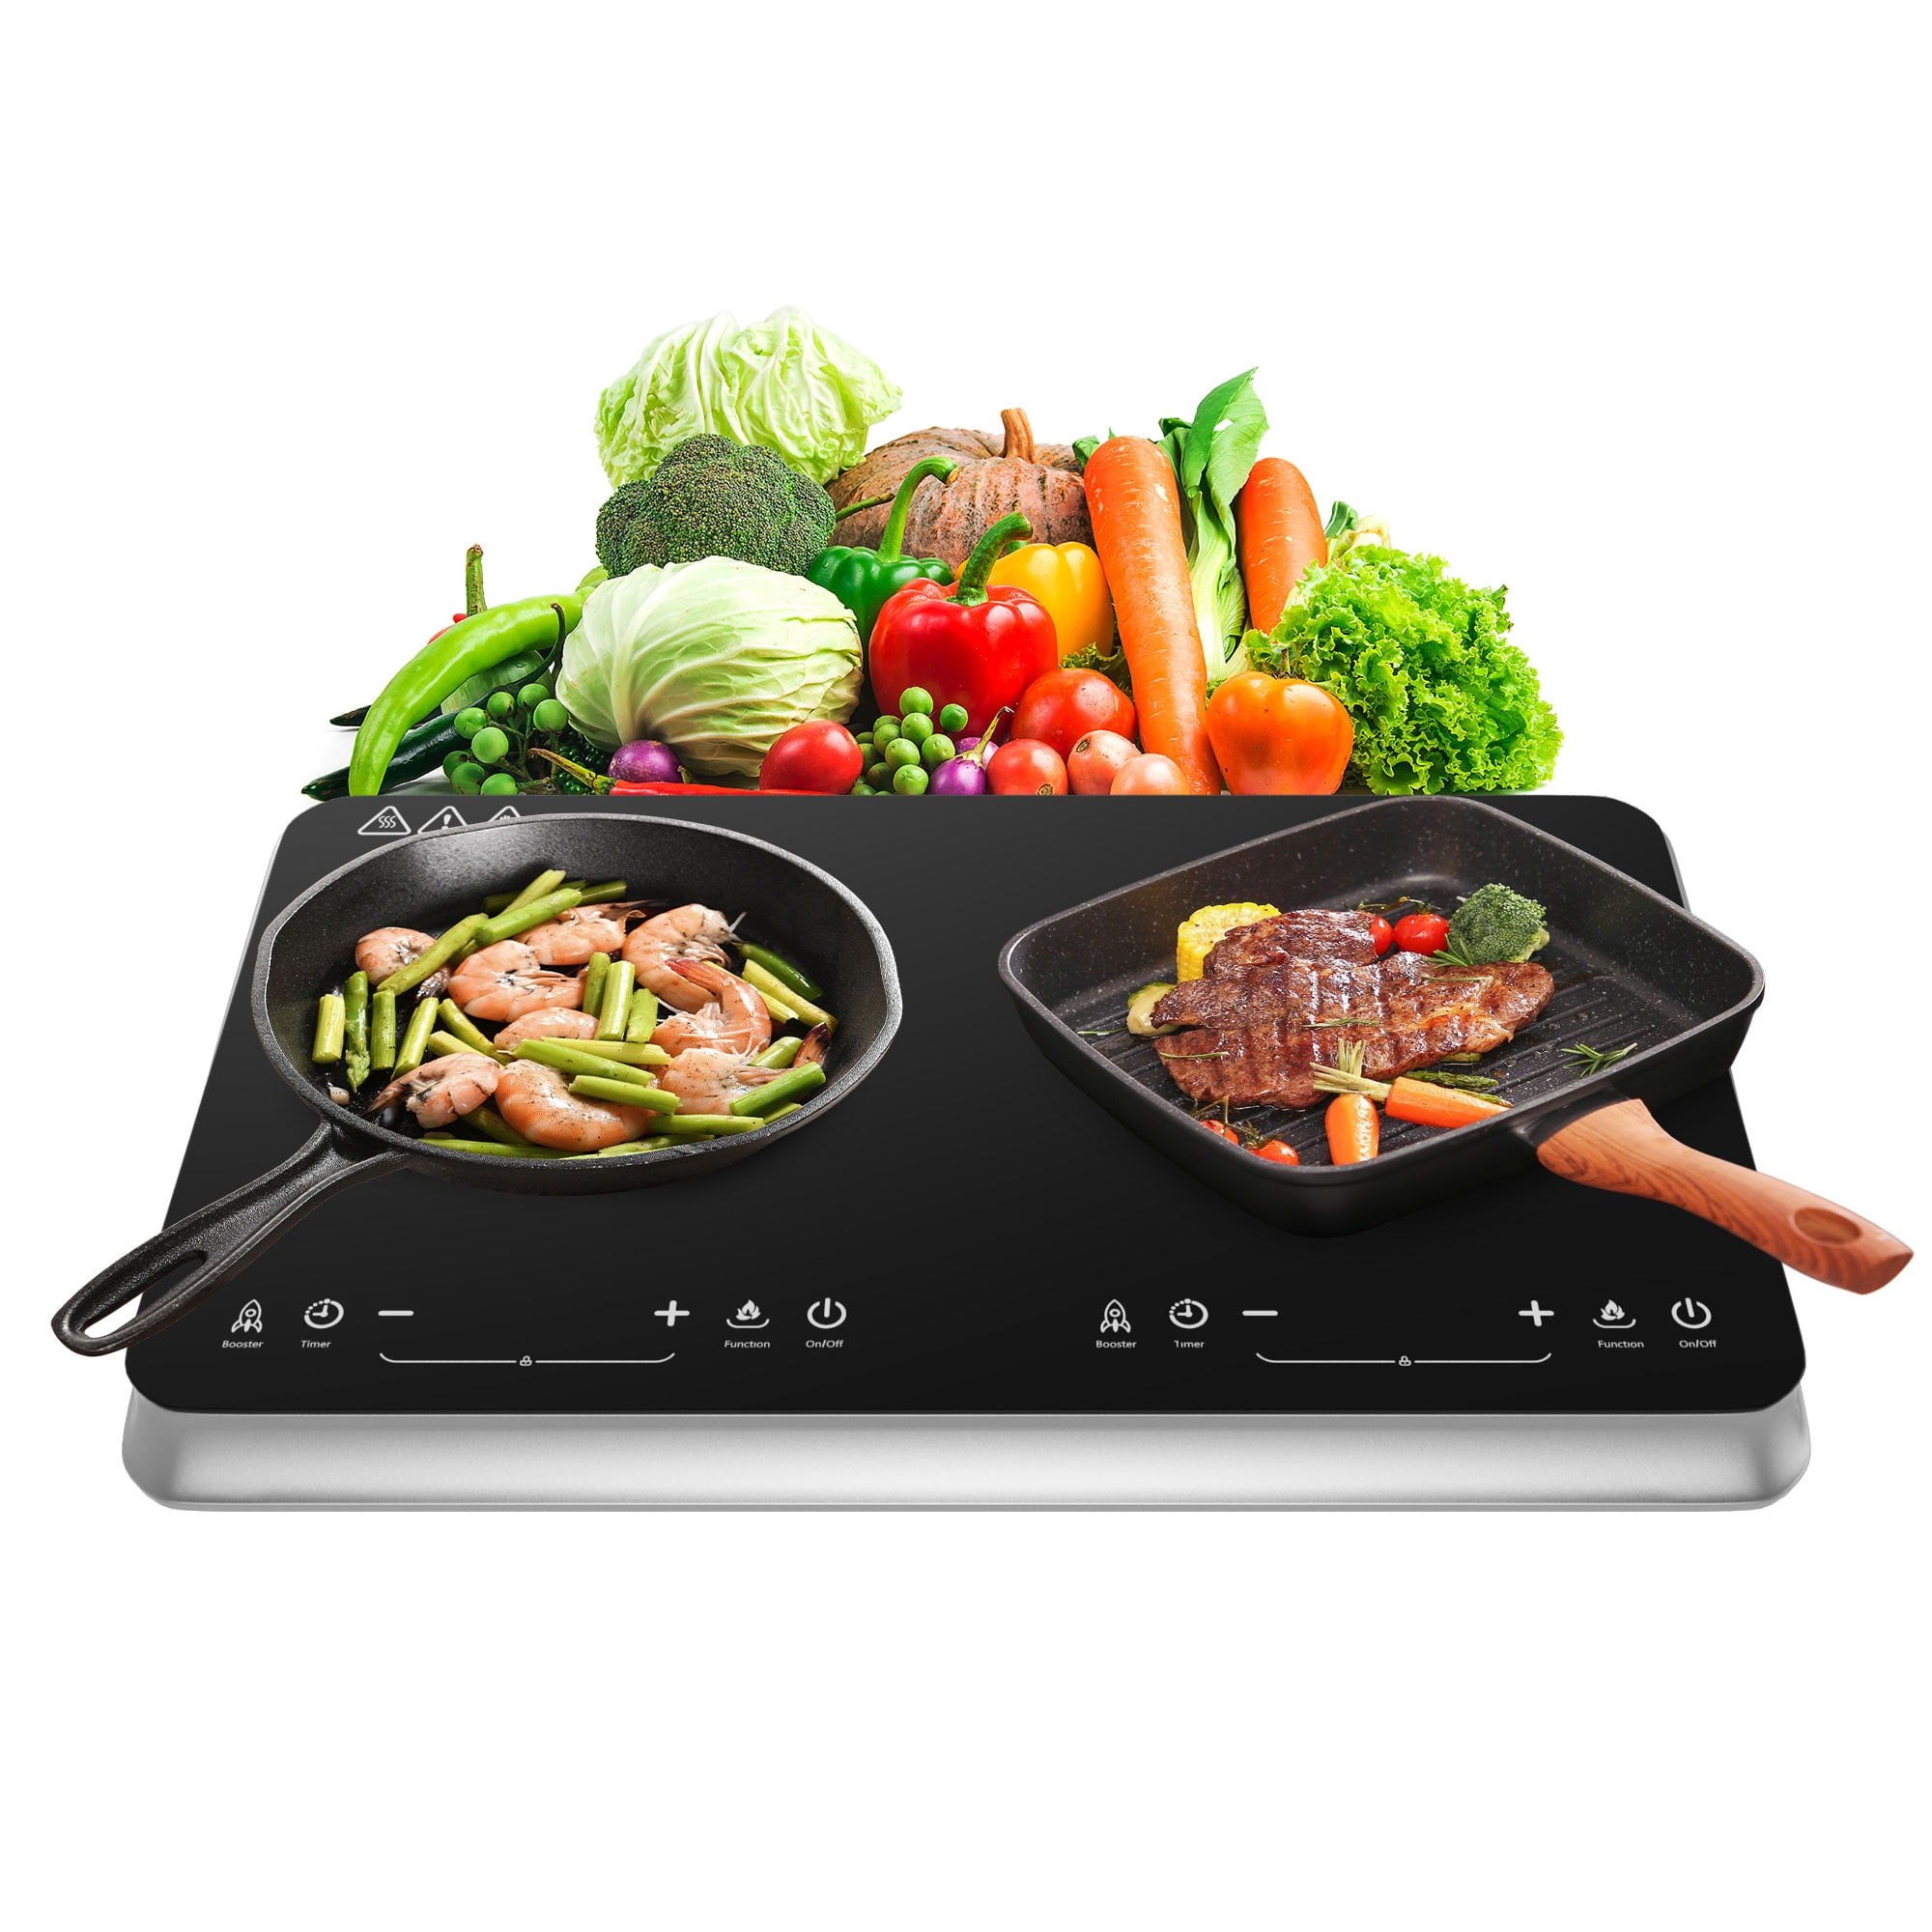 COOKTRON 1800W 120V Quick-Heat Double Burner Electric Induction Cooktop 